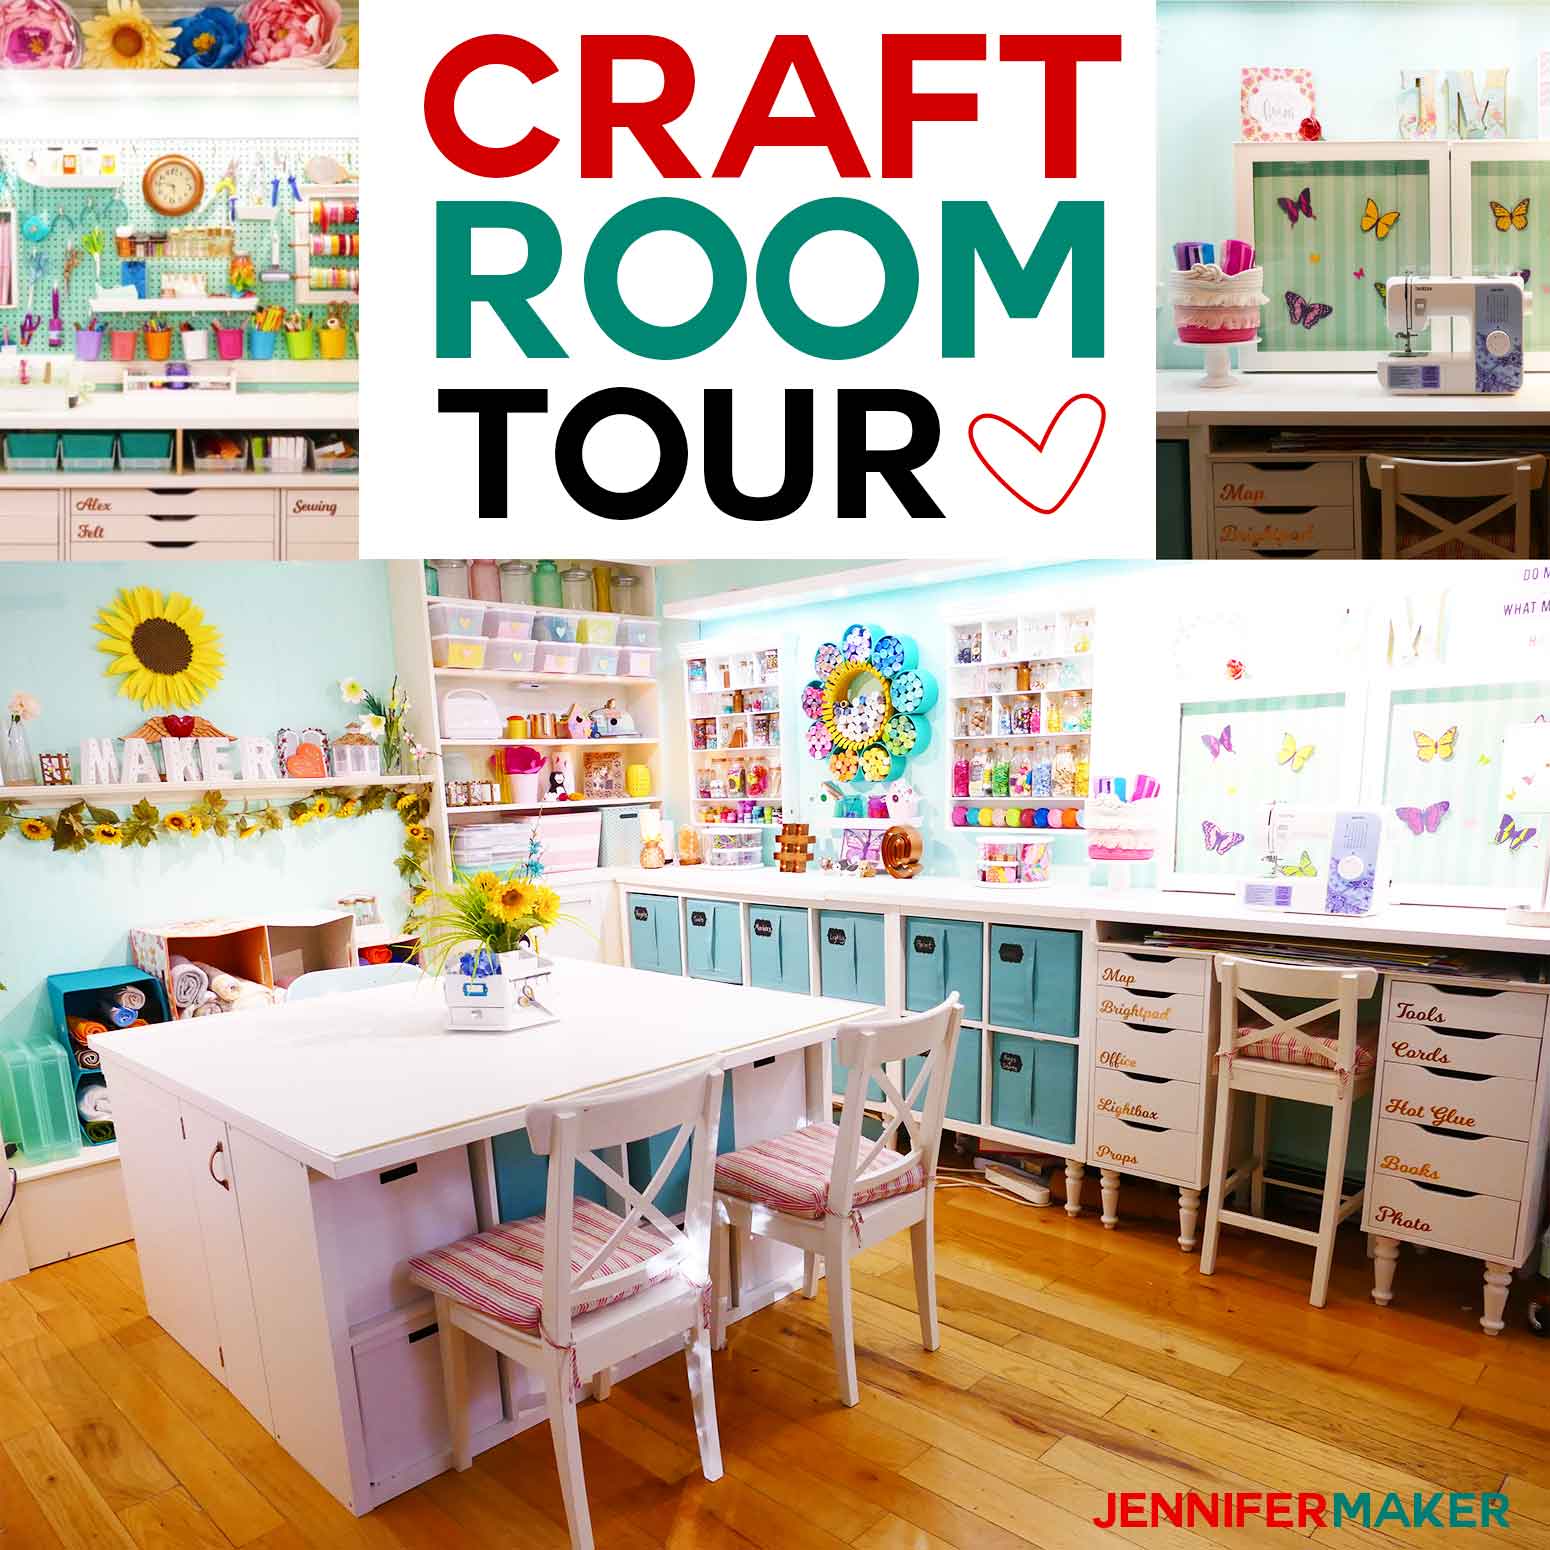 Tour my craft room for great organization and storage ideas! #craftroom #organization #storage #inspiration #crafty | craft room tour